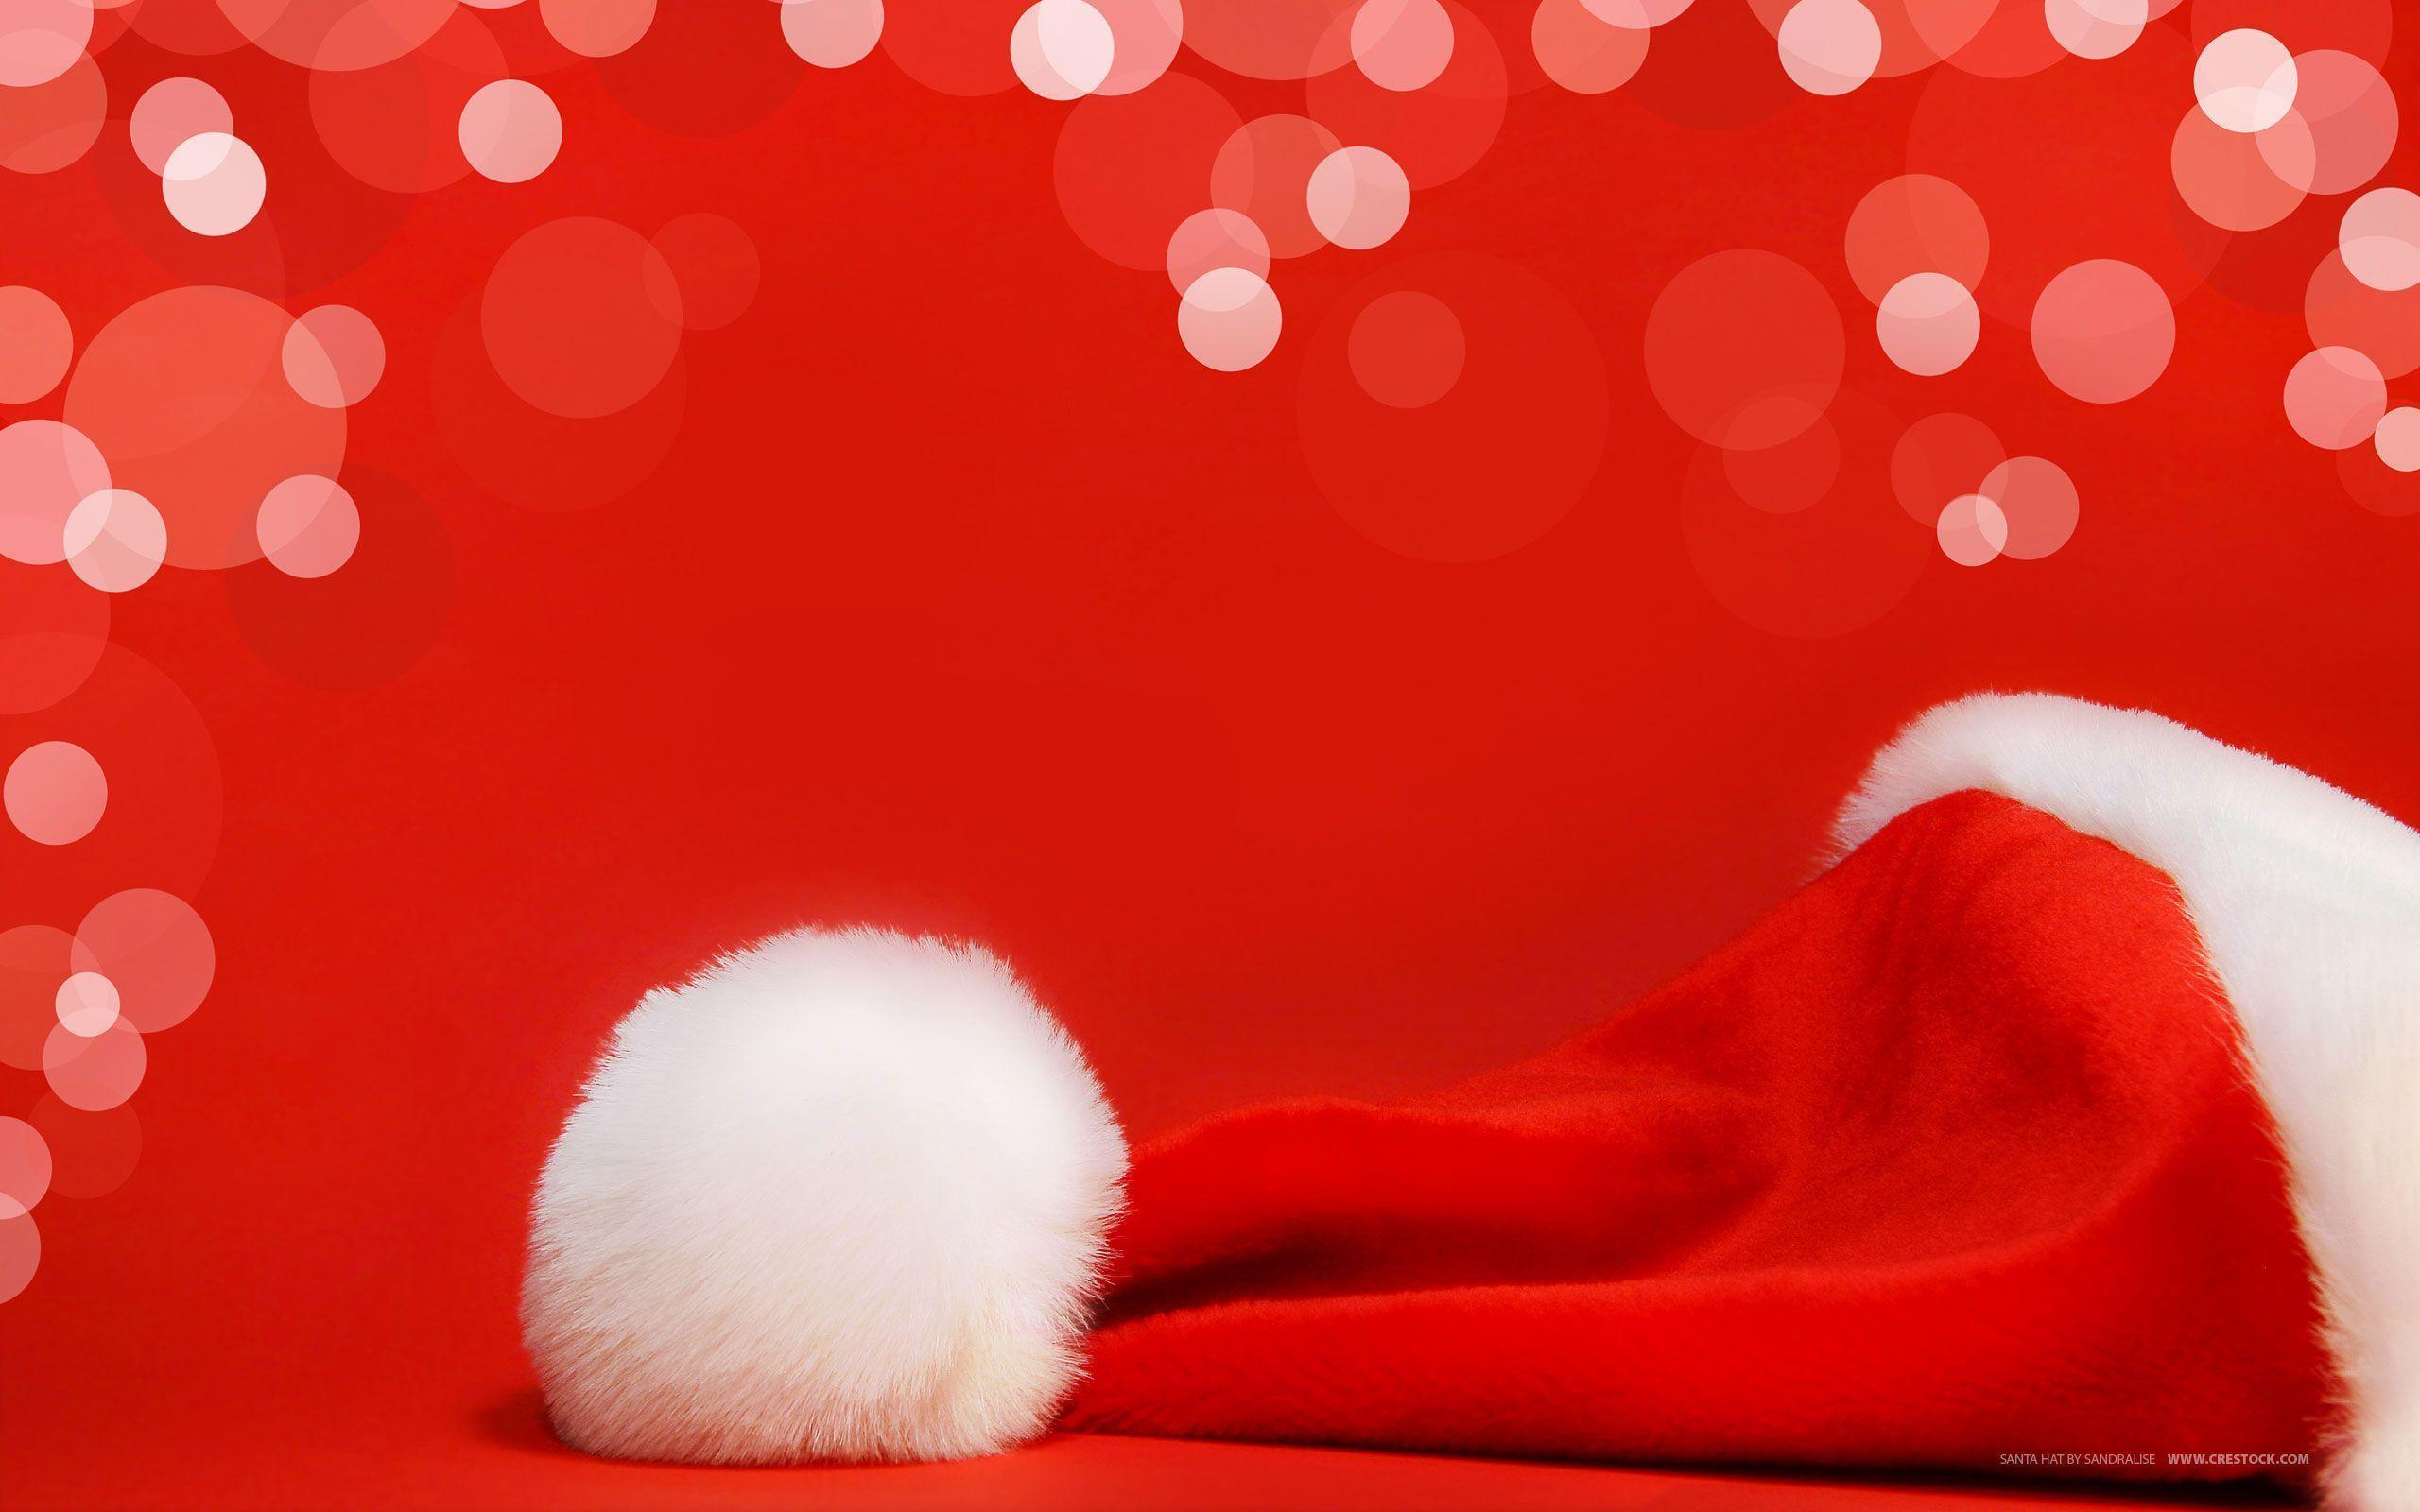 SANTA CLAUS GIFTS HD WALLPAPER, BACKGROUNDS, HD, IMAGES, SEARCH